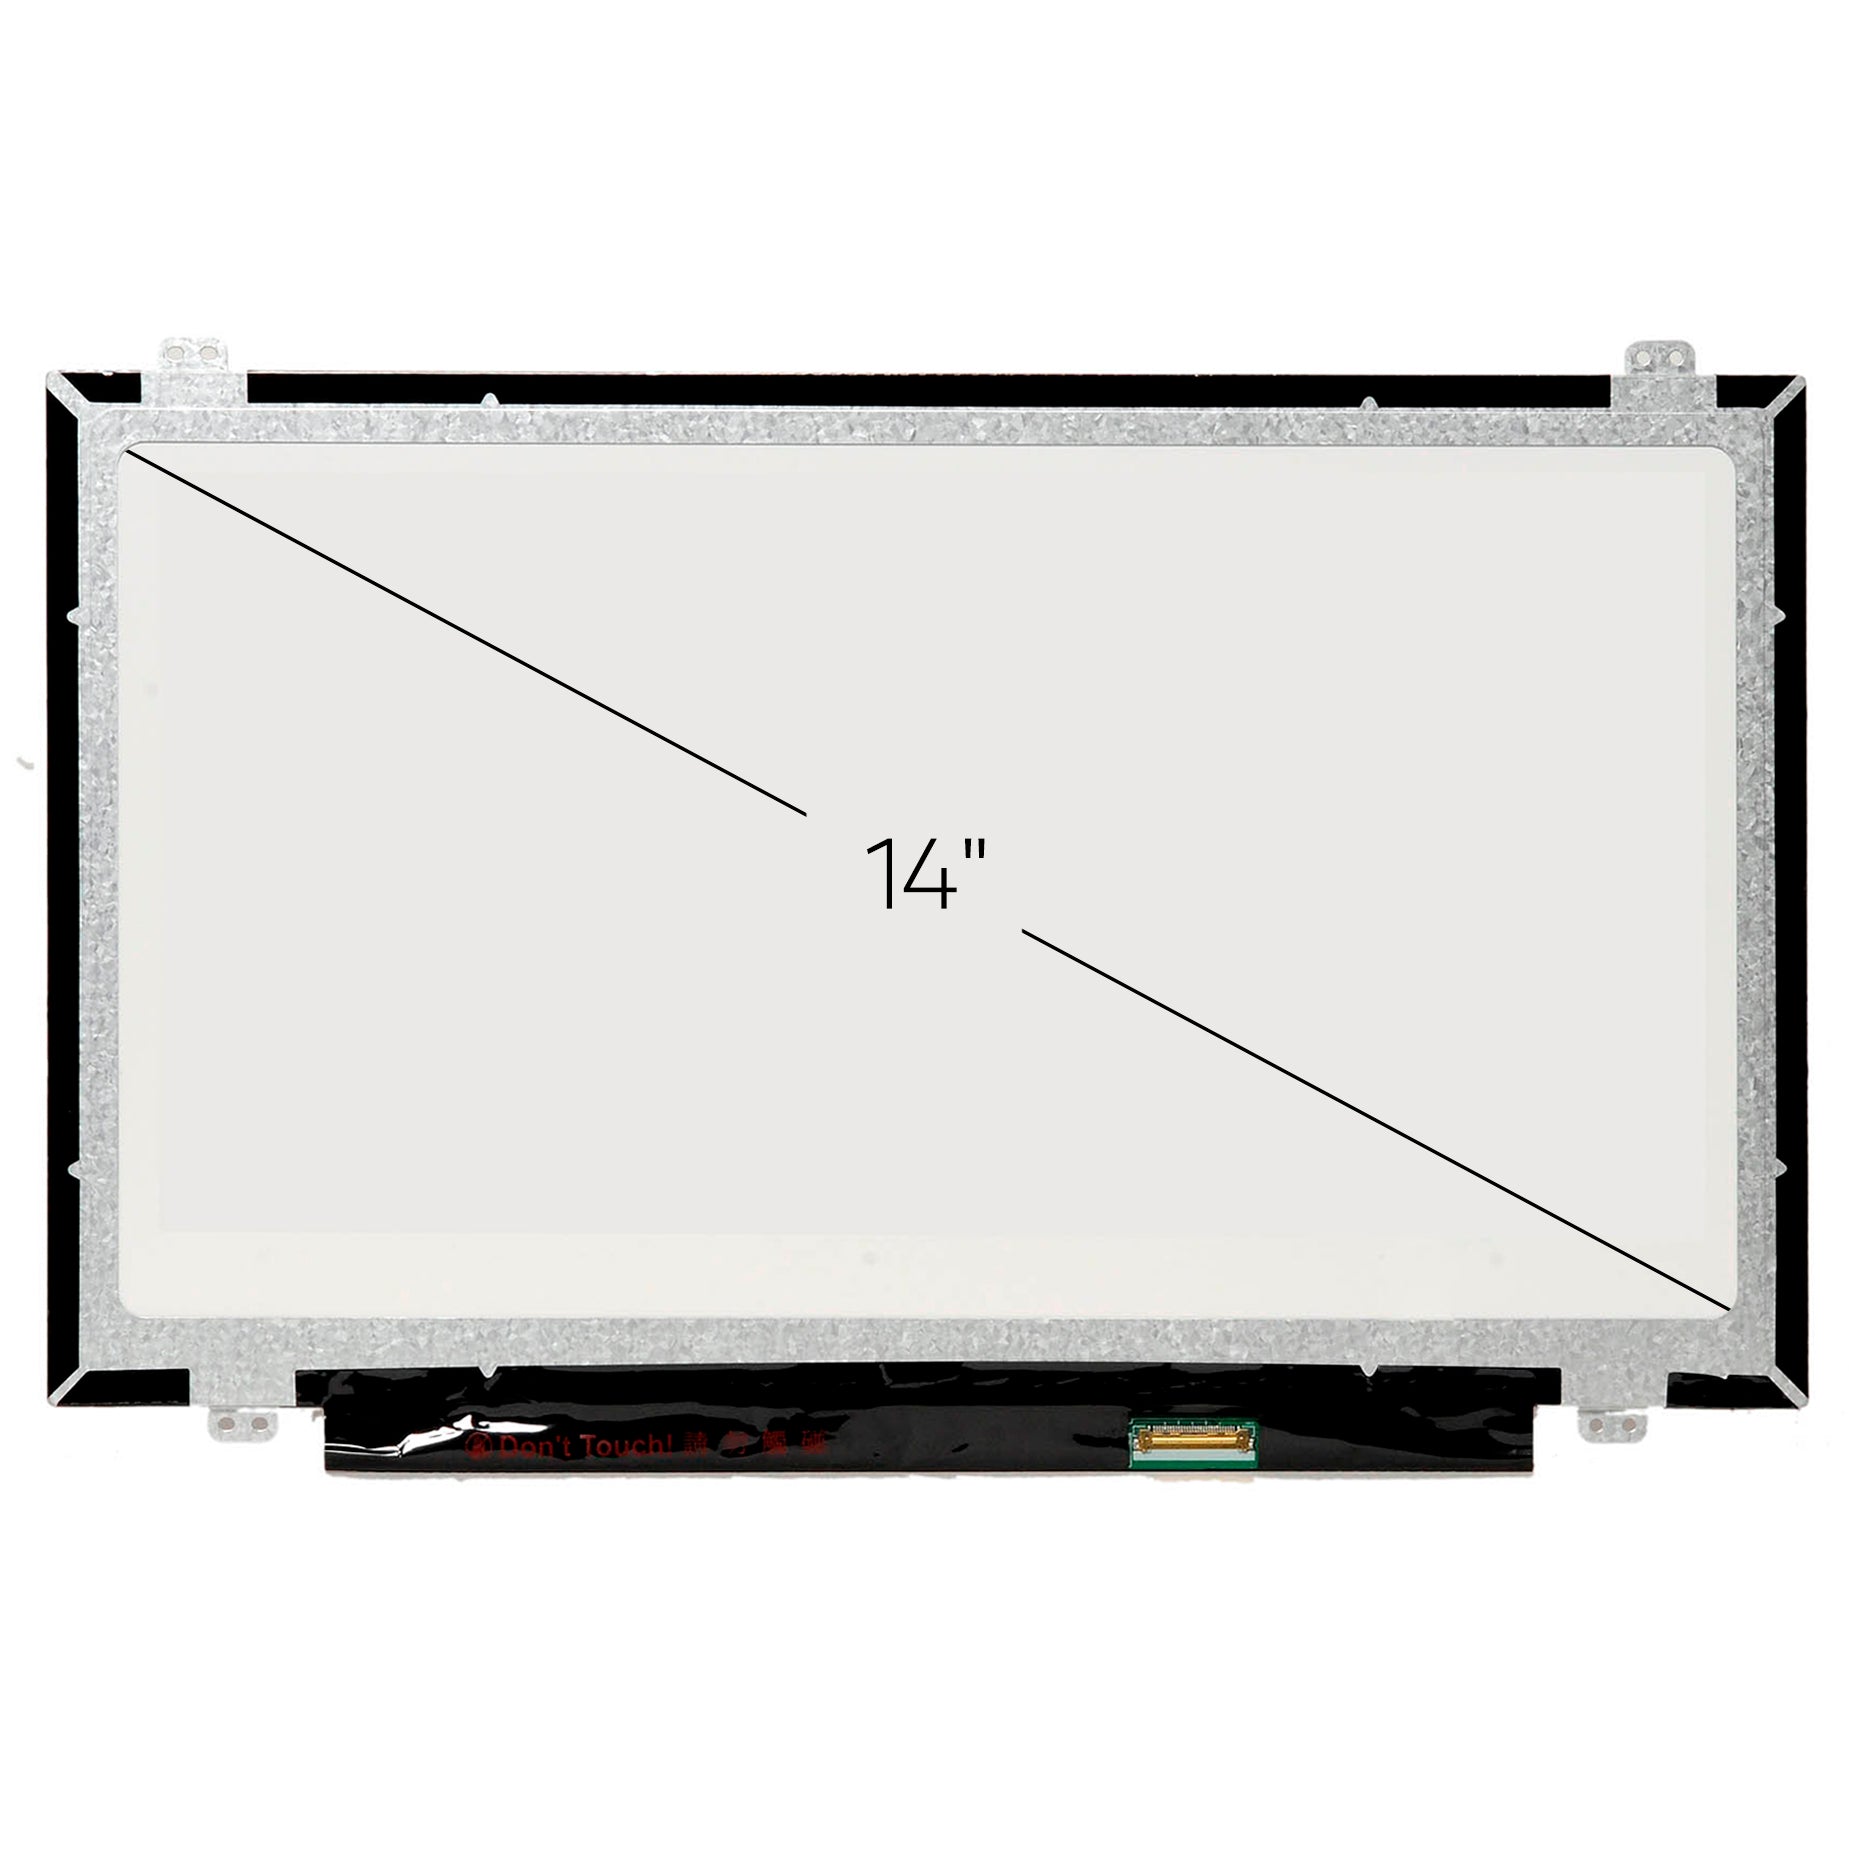 Screen Replacement for HP Probook 645 G2 HD 1366x768 Glossy LCD LED Display